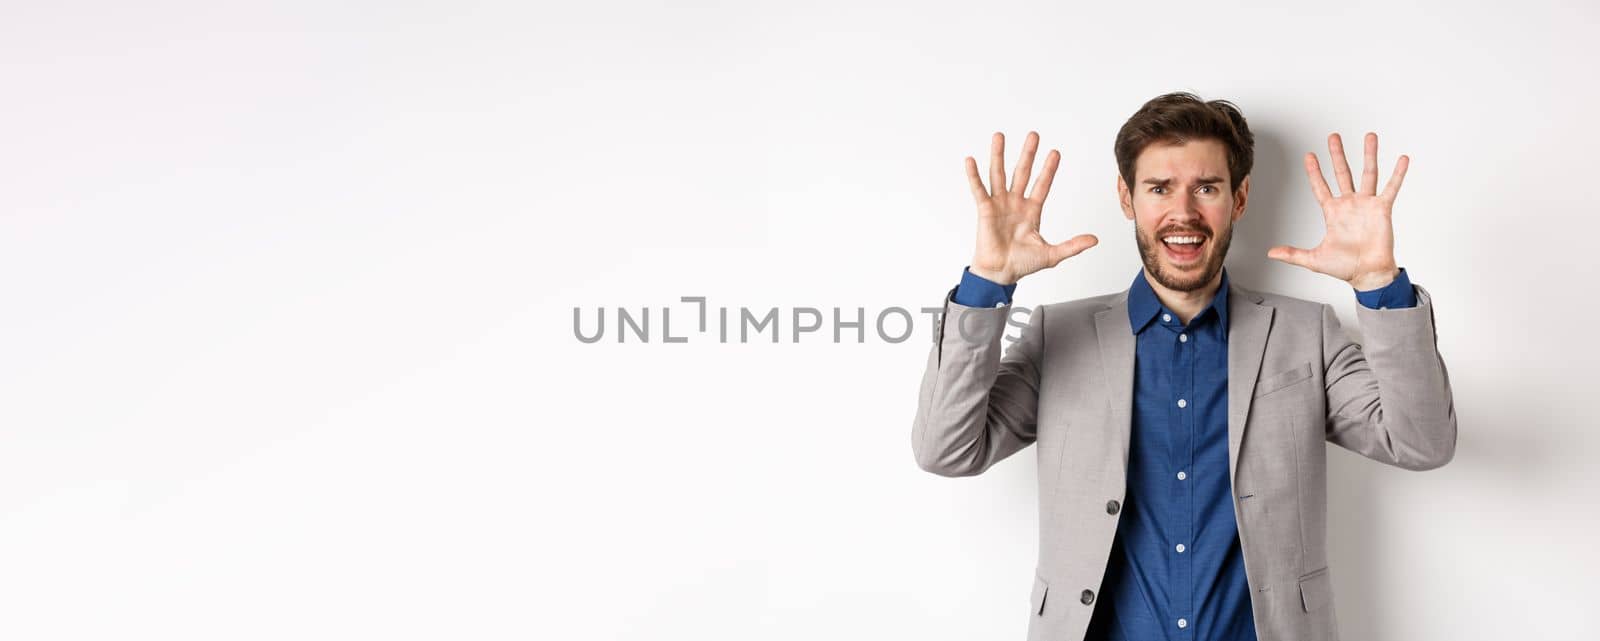 Frustrated man giving up, raising hands up in surrender and screaming, having argument, wearing suit and looking distressed, white background.